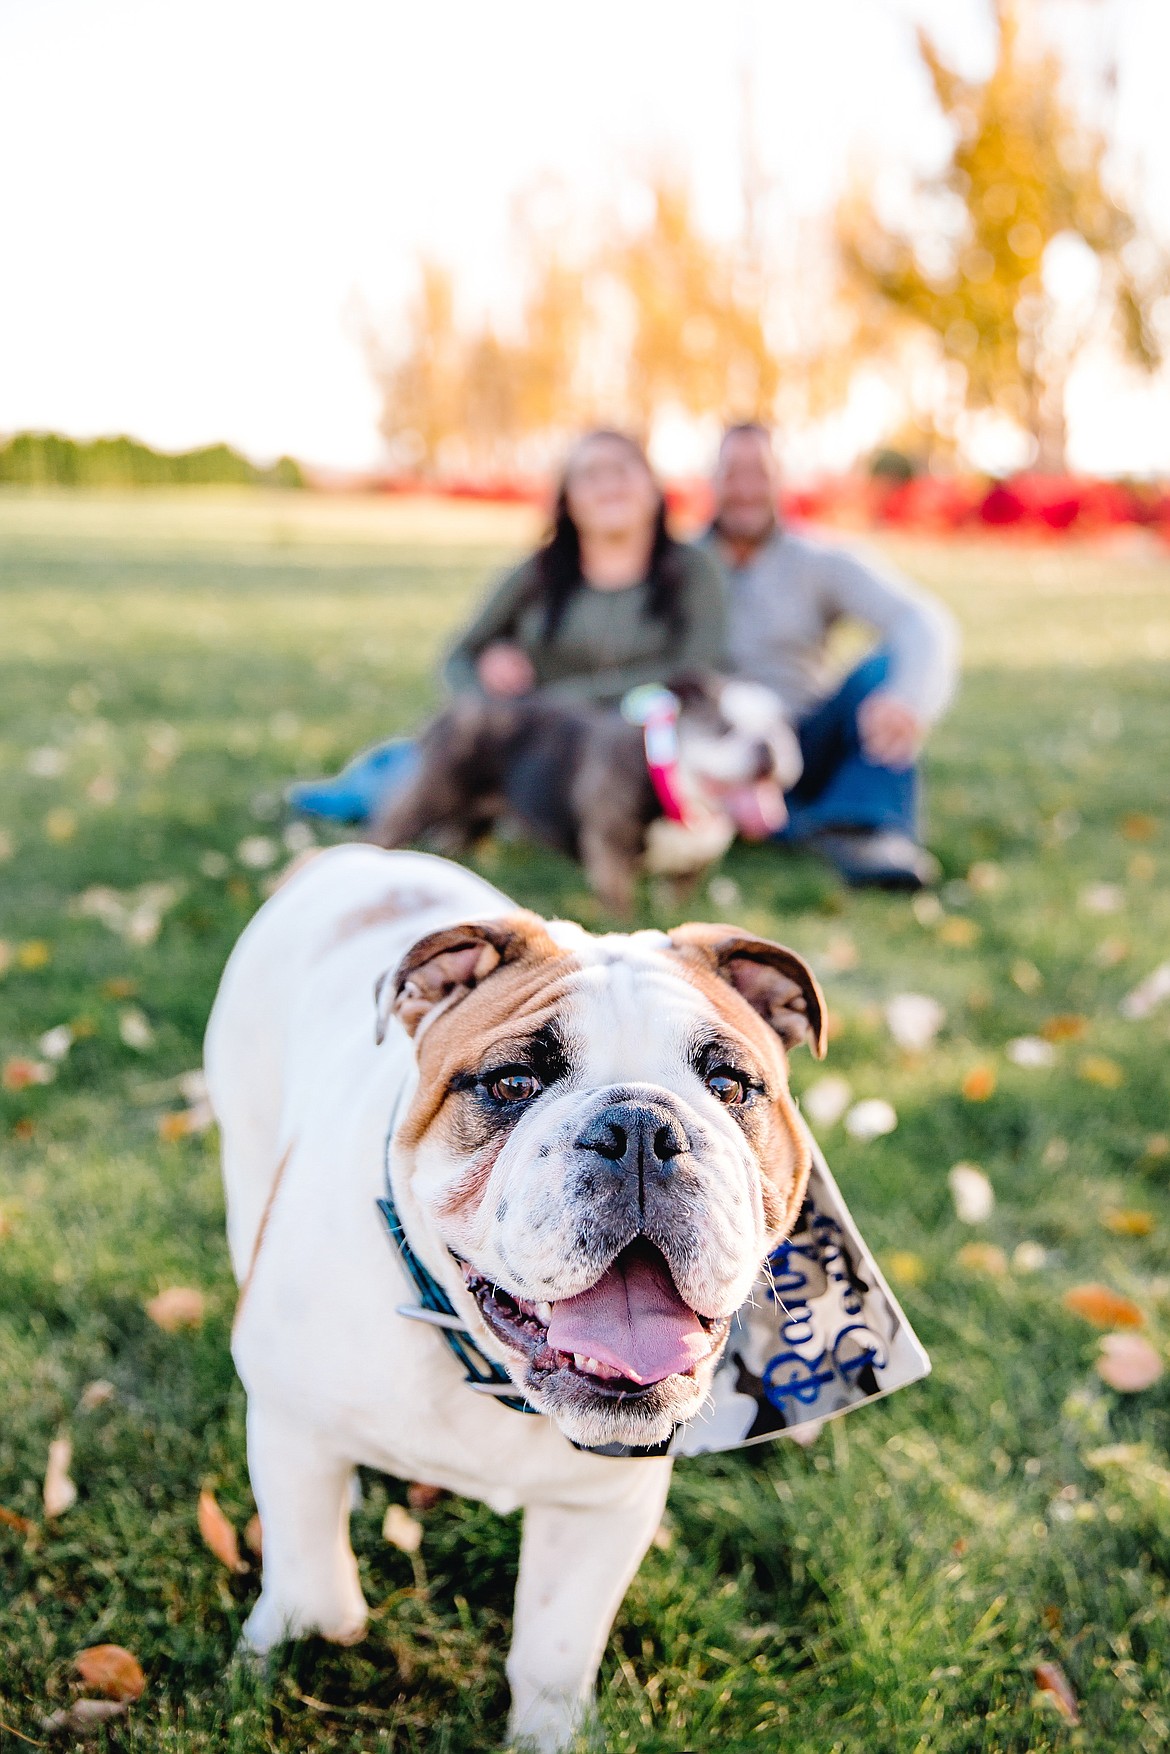 Ranger, a 1-year-old male English bulldog, steals the spotlight during a family photoshoot with his owners, Tara and Dusti Zerbo.